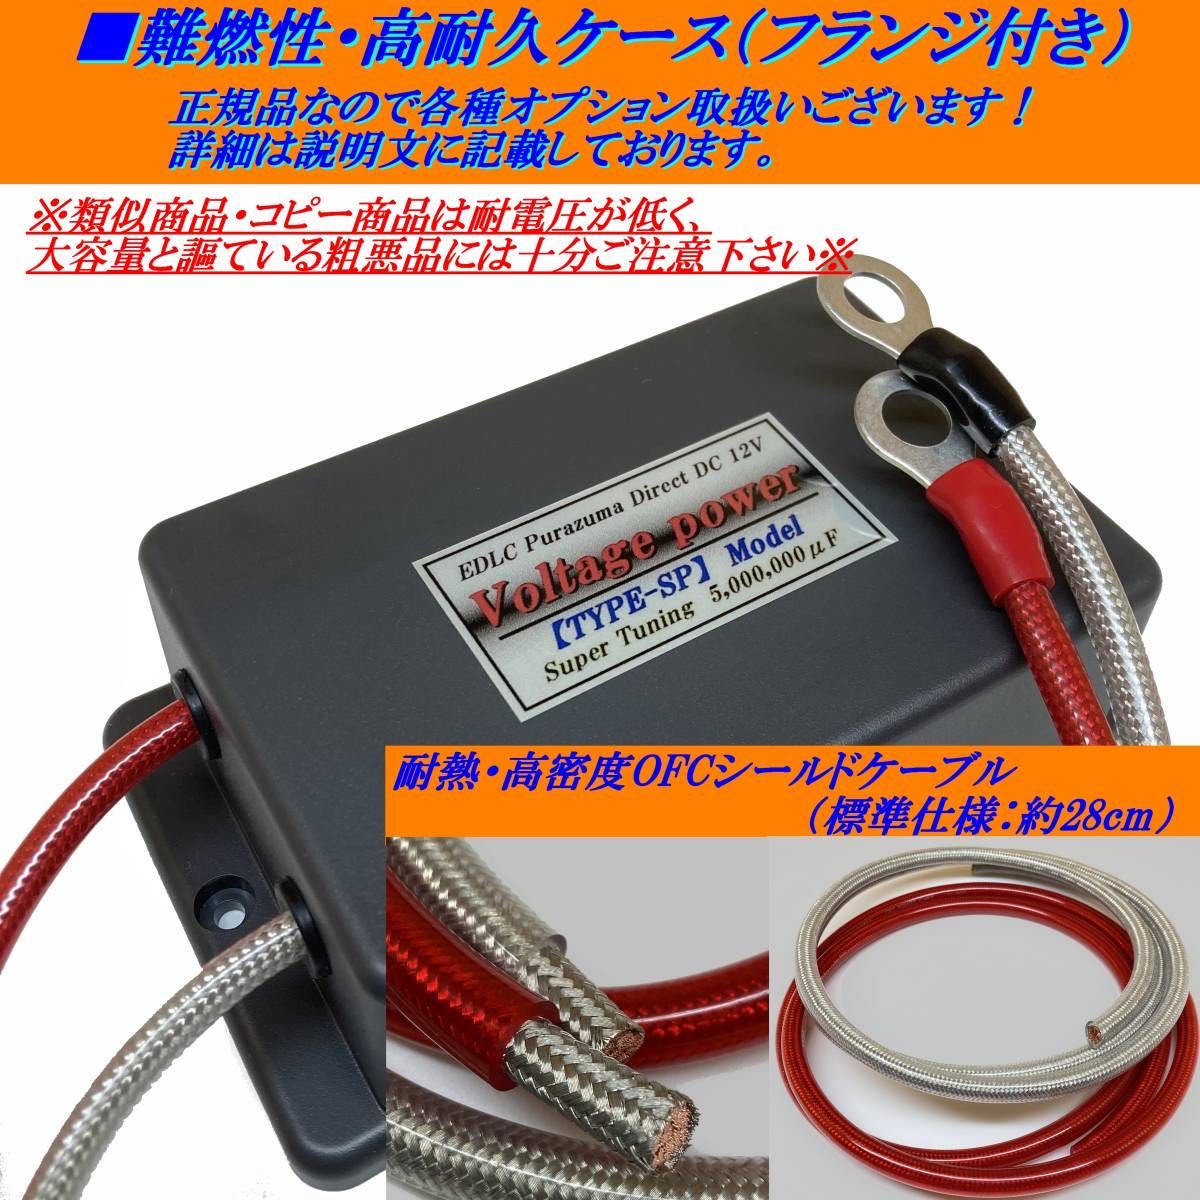  limited time *38%OFF* battery strengthening equipment rumor voltage power!! low price . electrolysis condenser is not high speed EDLC mounted! oil addition agen .. effect equipped 